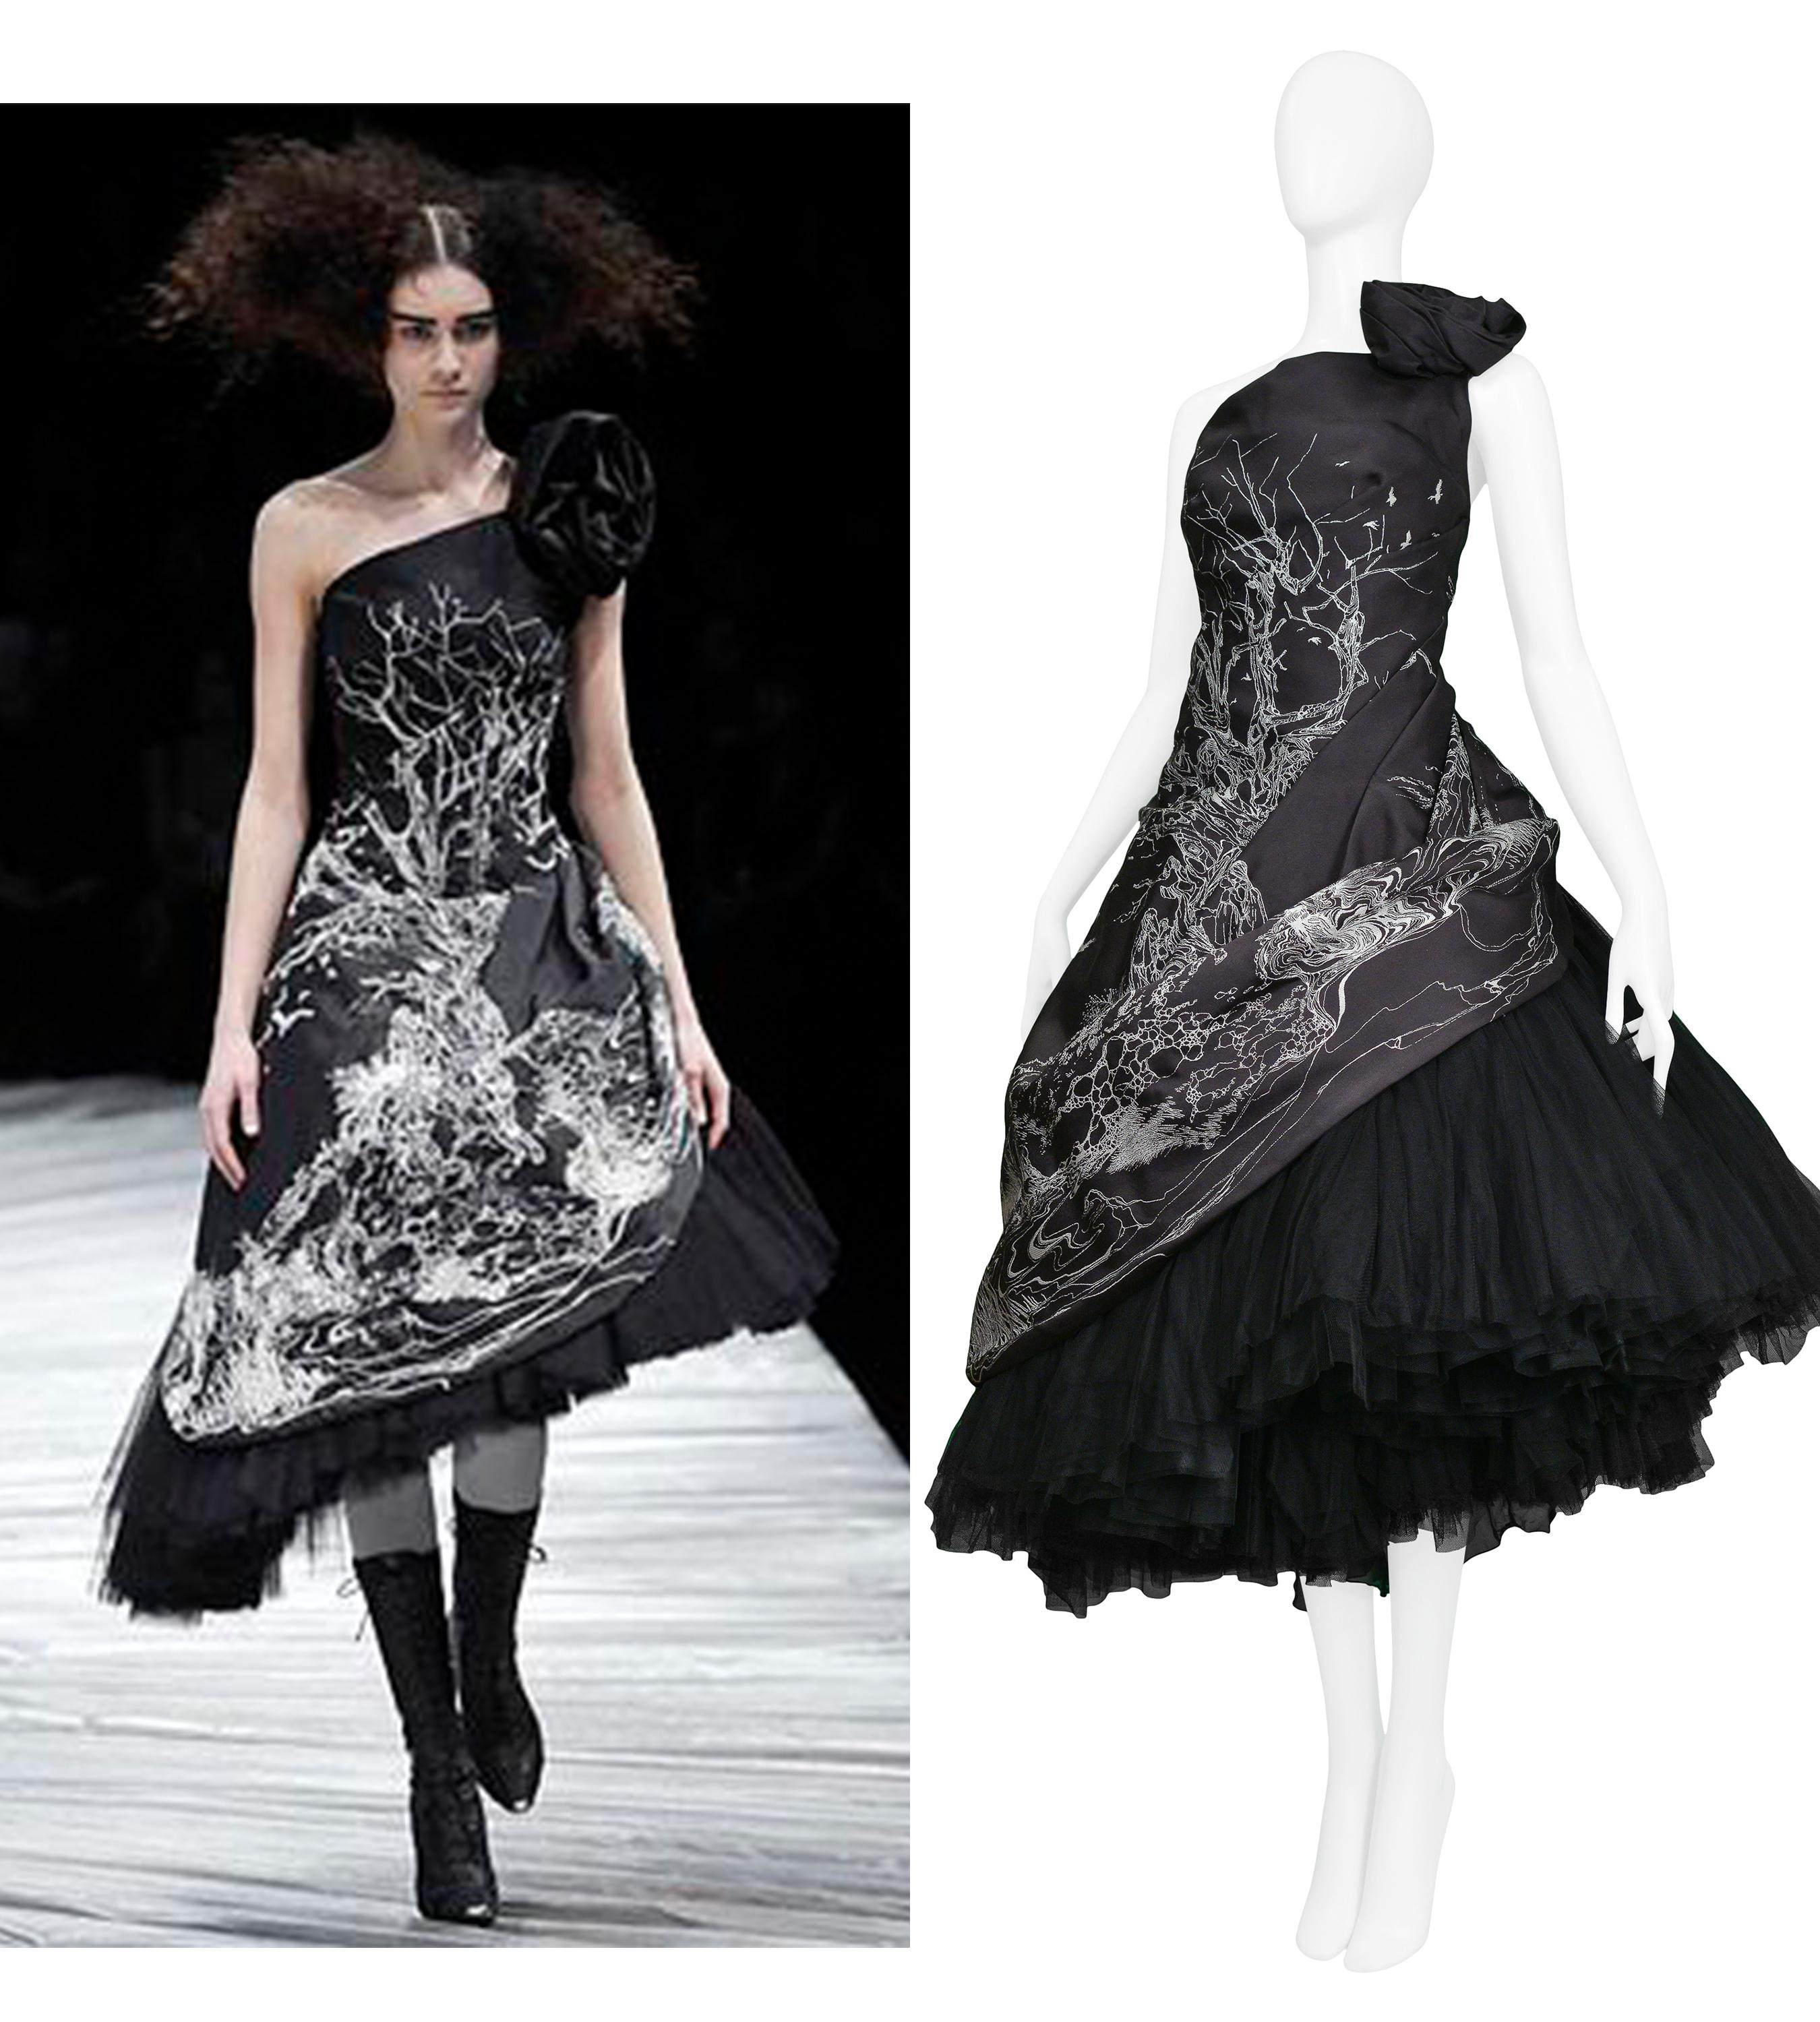 We are excited to offer an important vintage Alexander McQueen runway gown featuring a black satin taffeta asymmetrical strapless dress over attached layers of black heavy tulle, a black rosette, single strap, and center back zipper. The white